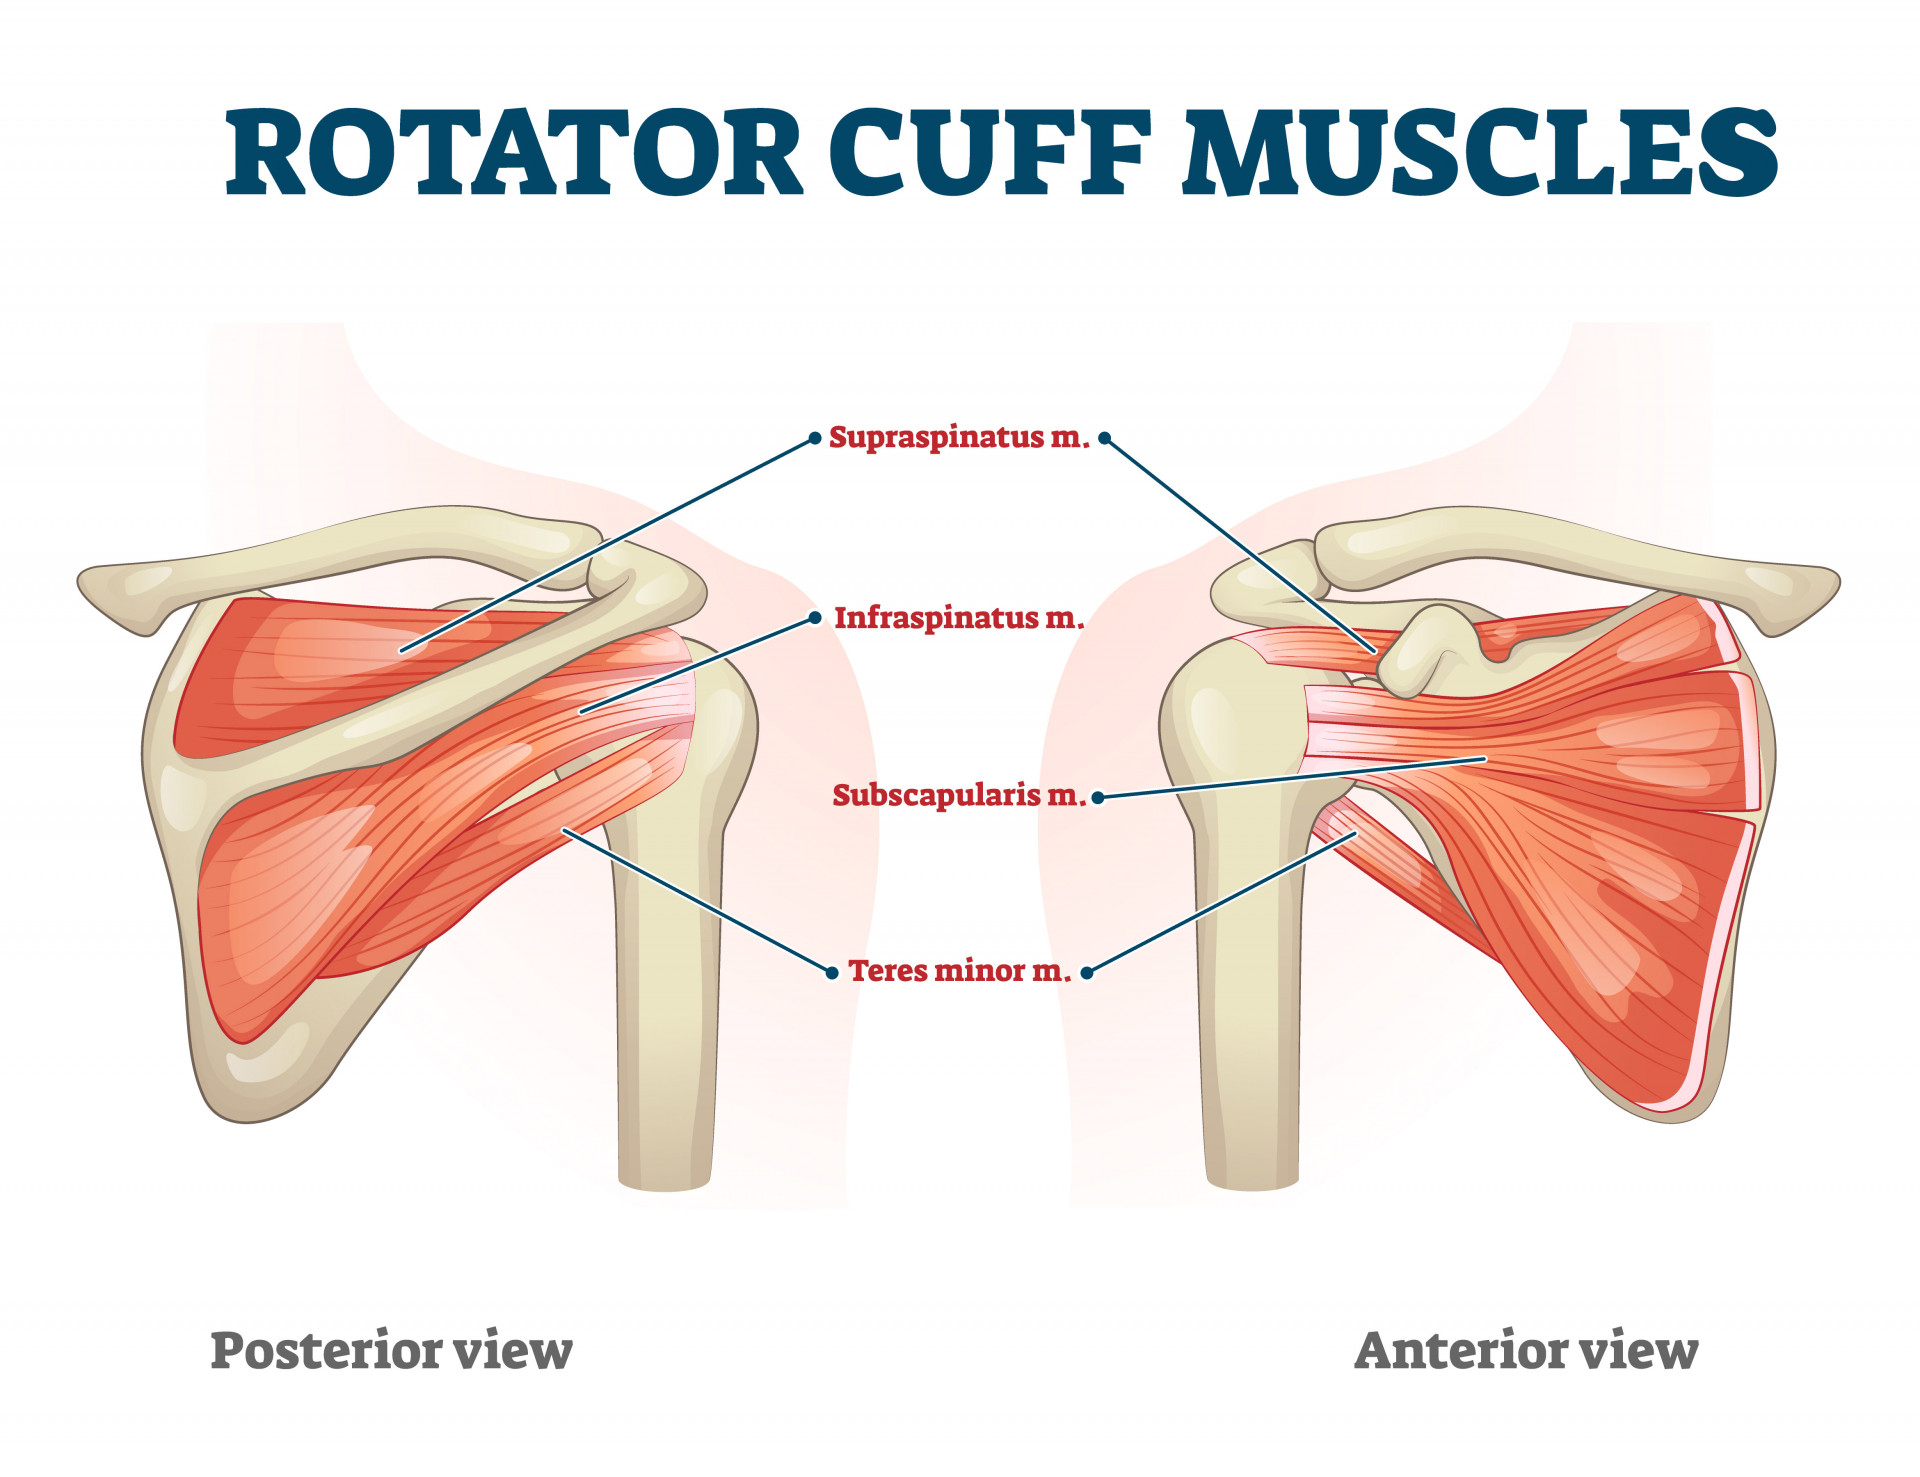 Muscles Of The Shoulder: Anatomy, Function & Common Injuries